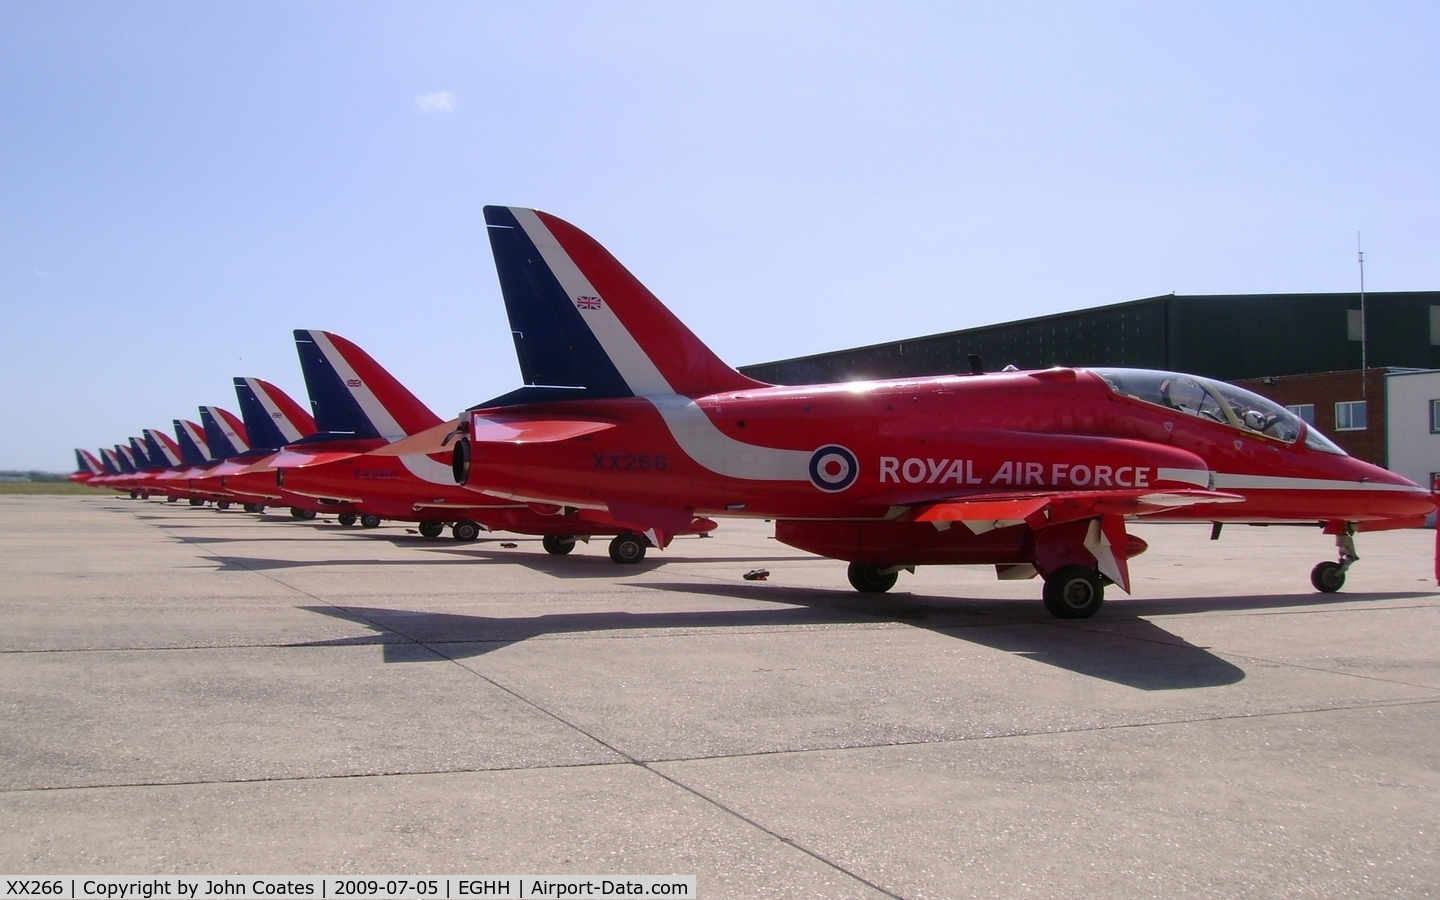 XX266, 1979 Hawker Siddeley Hawk T.1A C/N 102/312102, Lined up with the Reds at Cobham